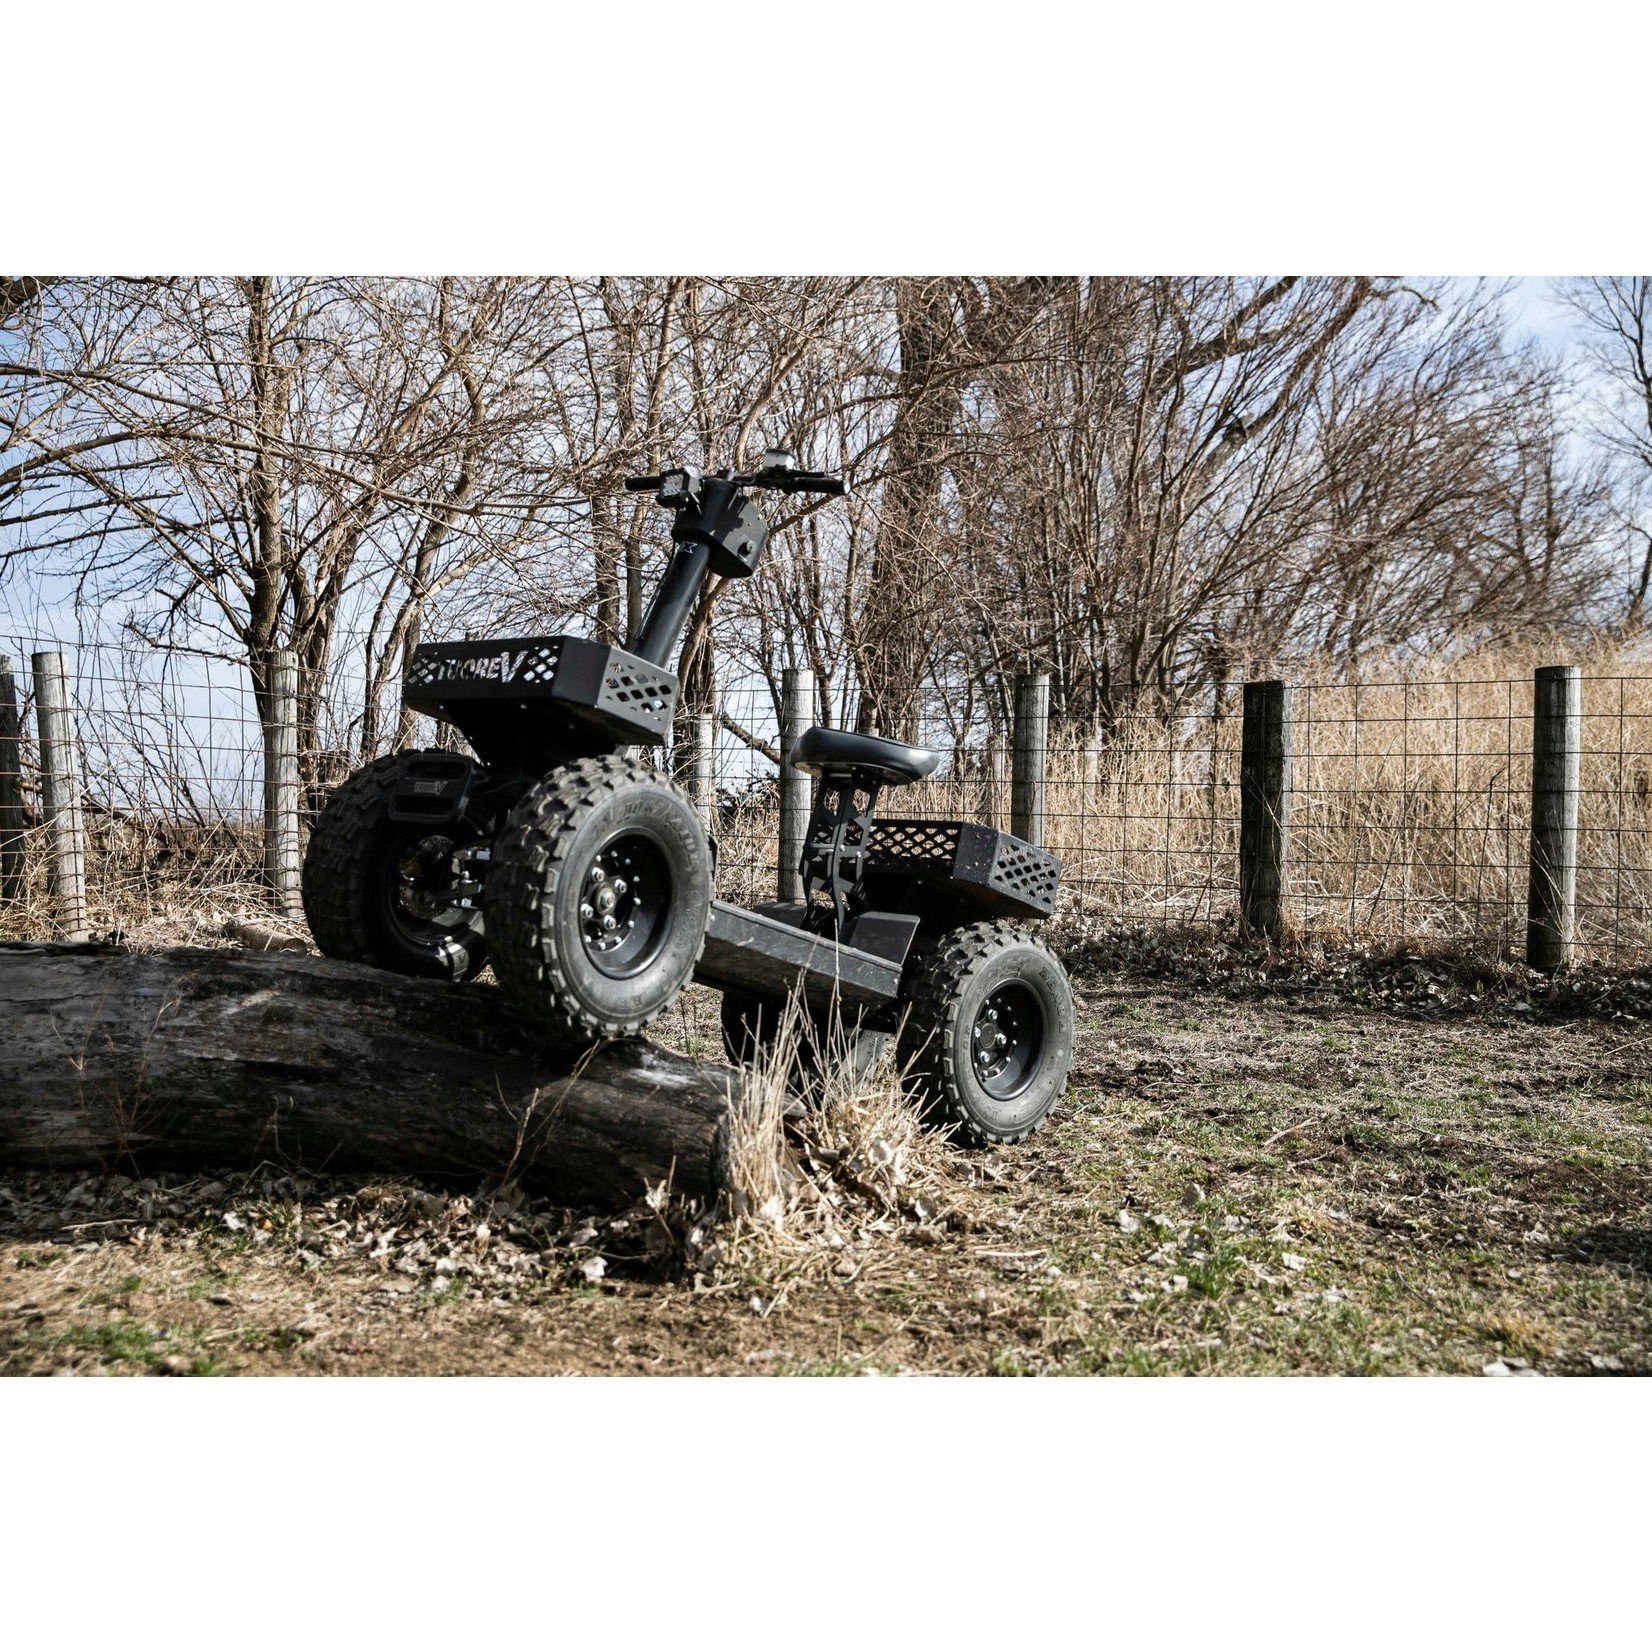 TuoreV TuoreV - The Ultimate Off Road Electric Vehicle (Made in the USA)